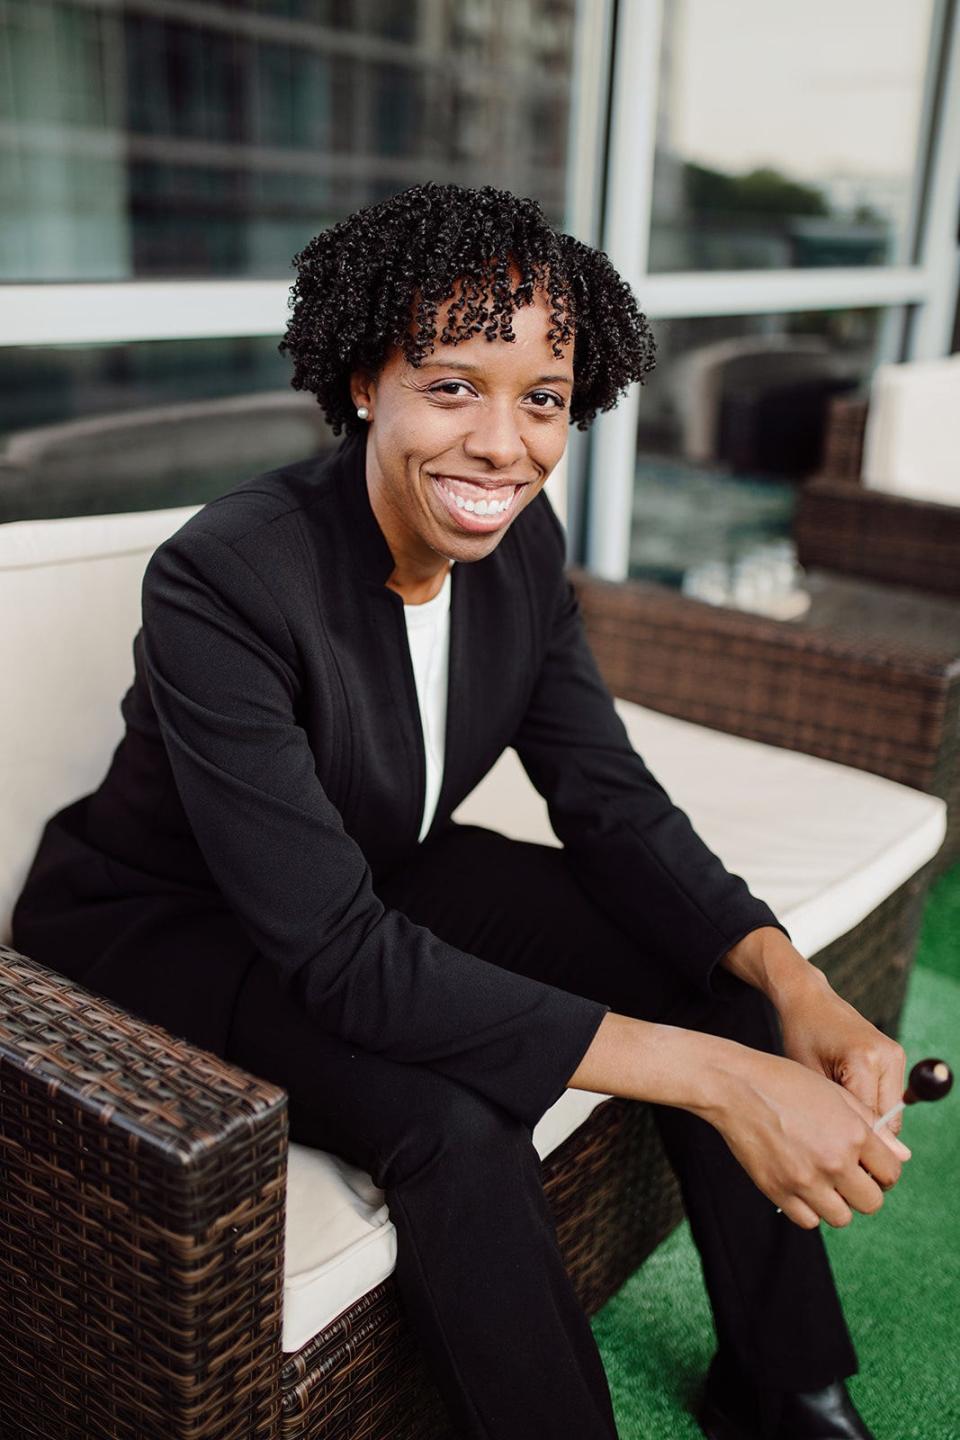 Kalena Bovell, assistant conductor to the Memphis Symphony Orchestra and Conductor of the Memphis Youth Symphony, is a finalist to become the next music director and conductor of the Lafayette Symphony Orchestra.